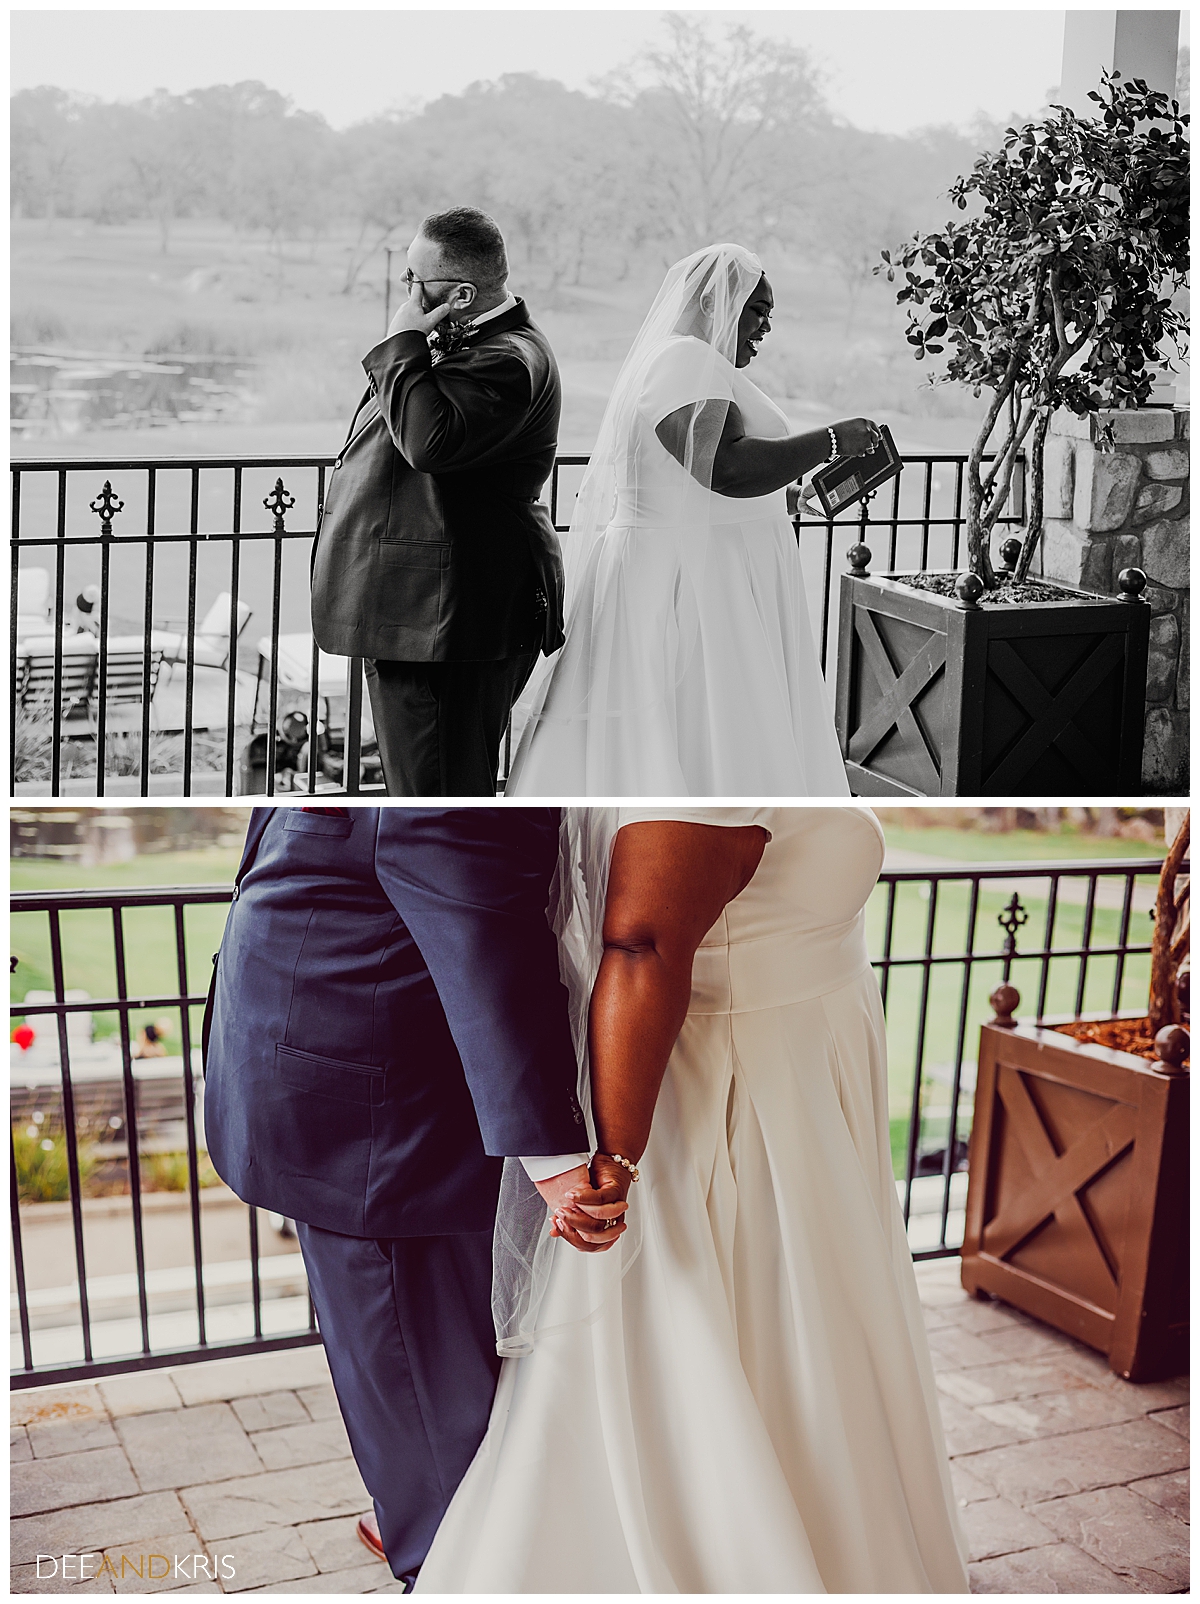 Two images: Top black and white image of bride and groom back to back and groom wiping tear away as bride reads her vows. Bottom color image of couple back to back holding hands.